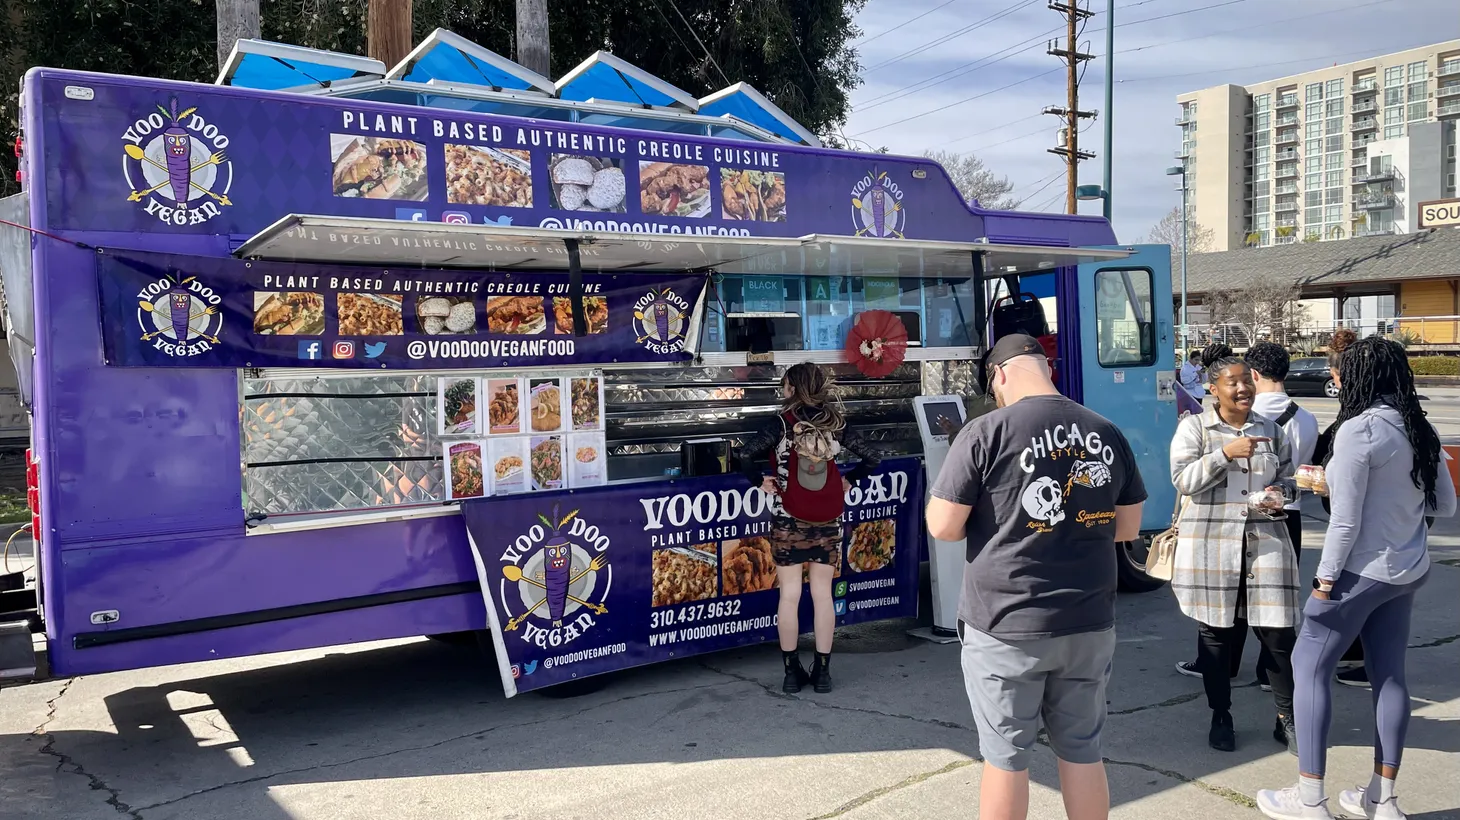 Voodoo Vegan is one of many vendors at a weekly vegan pop-up market in North Hollywood who are redefining plant-based food in LA.